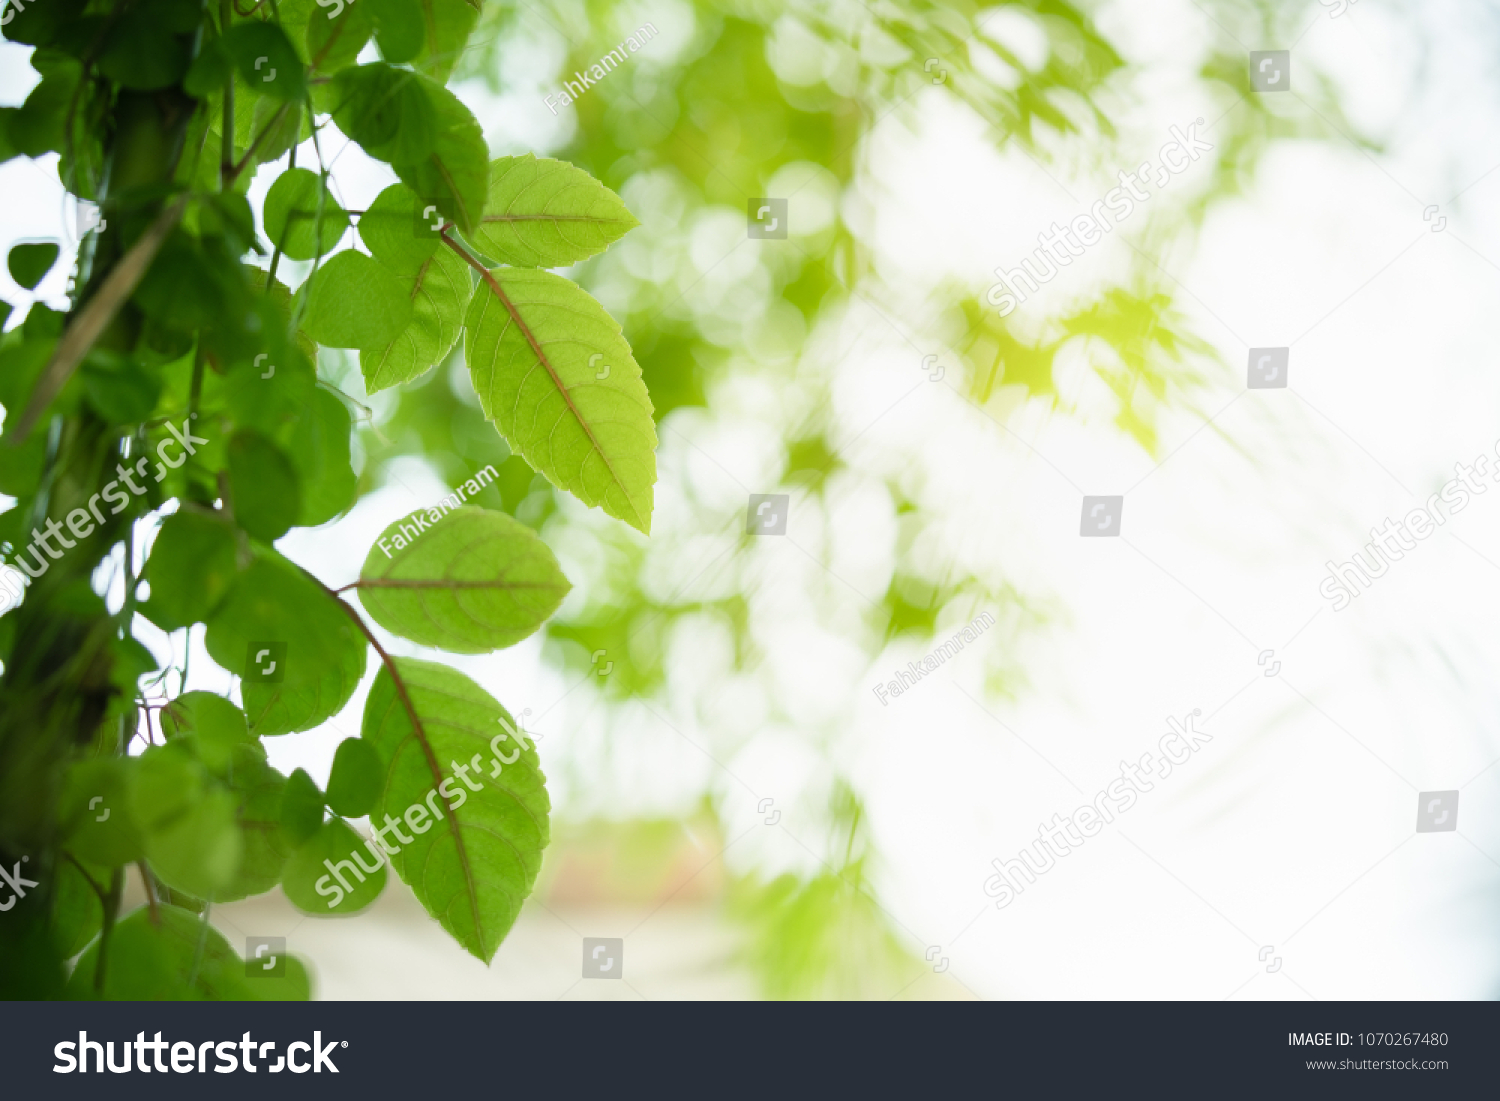 Nature of green leaf in garden at summer. Natural green leaves plants using as spring background cover page environment ecology or greenery wallpaper #1070267480